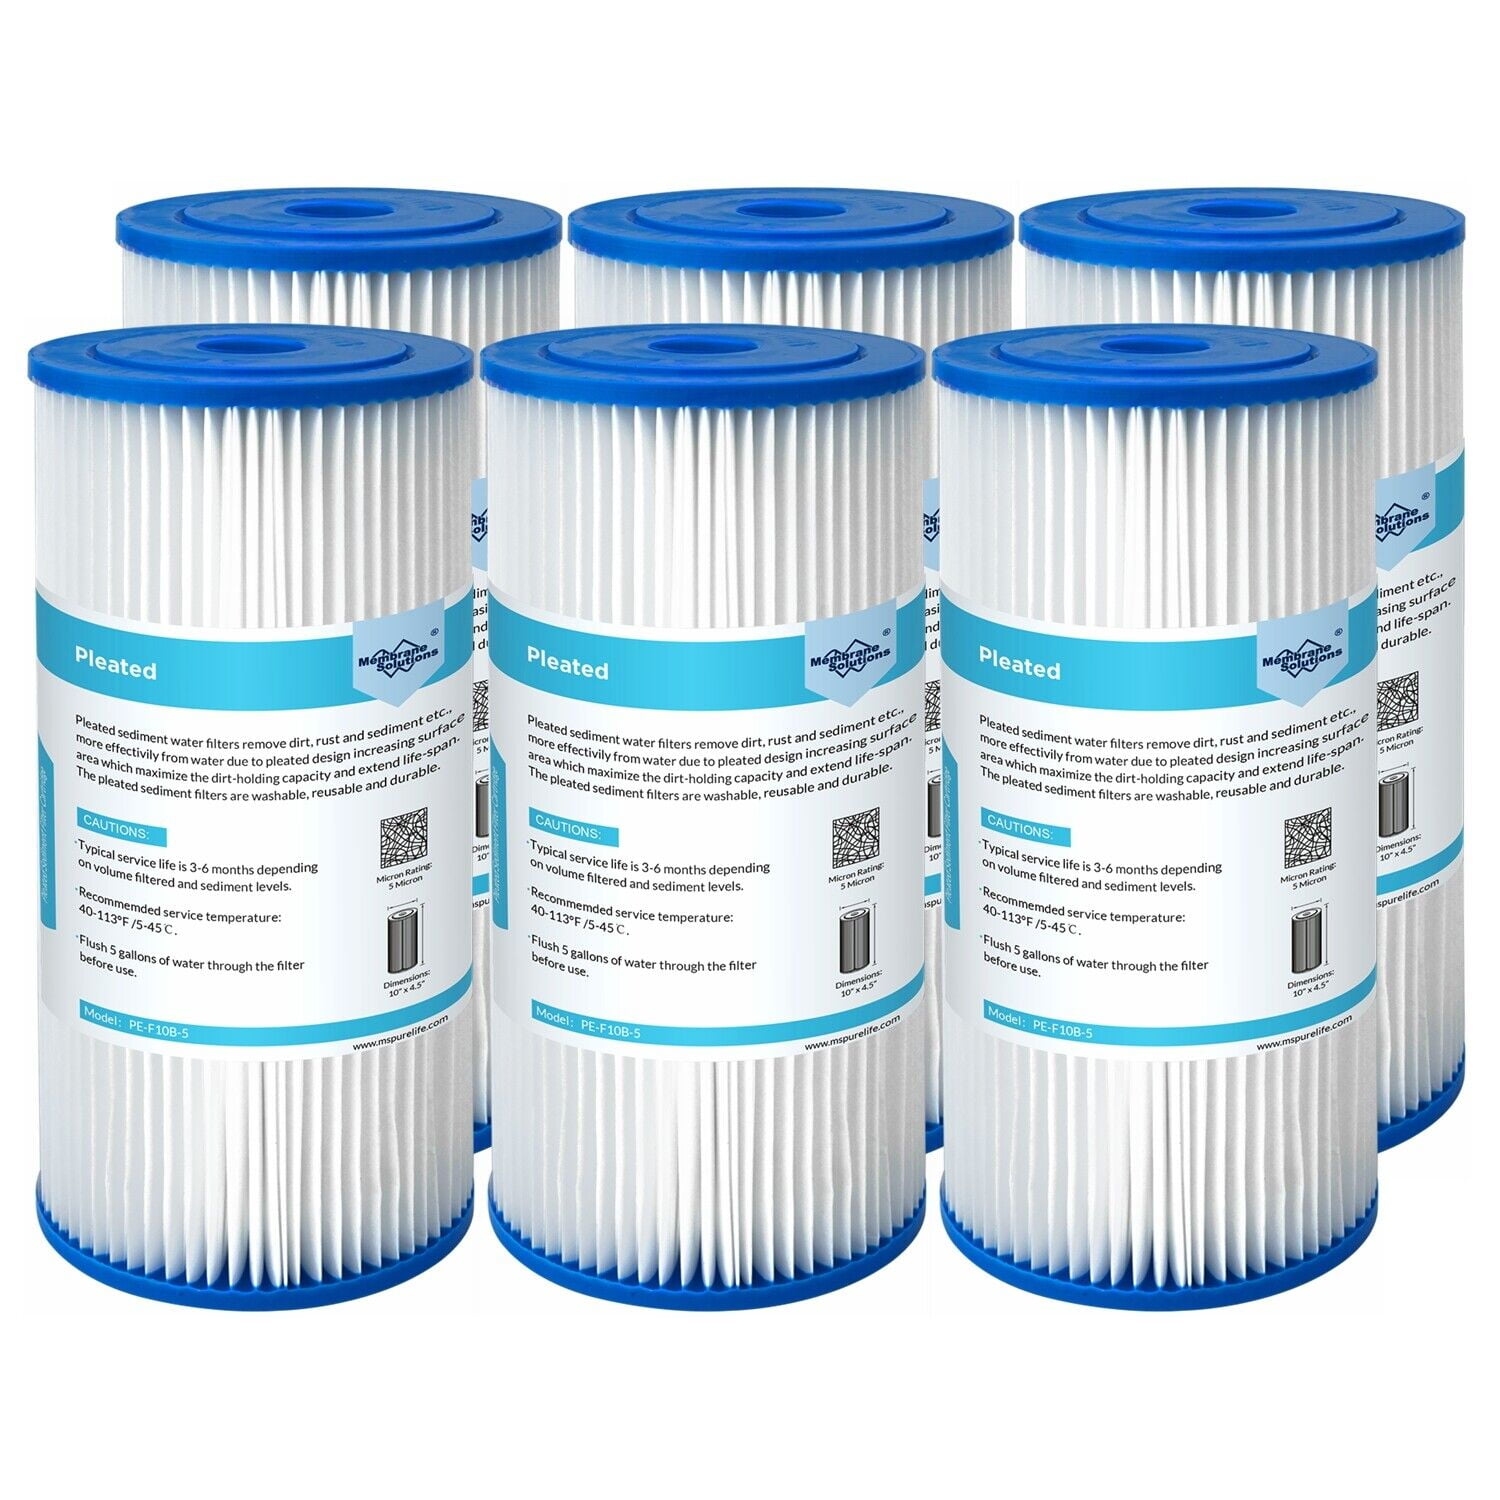 10 x 4.5 Whole House Pleated Sediment Water Filter Replacement for GE  FXHSC, Culligan R50-BBSA, Pentek R50-BB, DuPont WFHDC3001, W50PEHD,  GXWH40L, GXWH35F, for Well Water, Pack of 6 